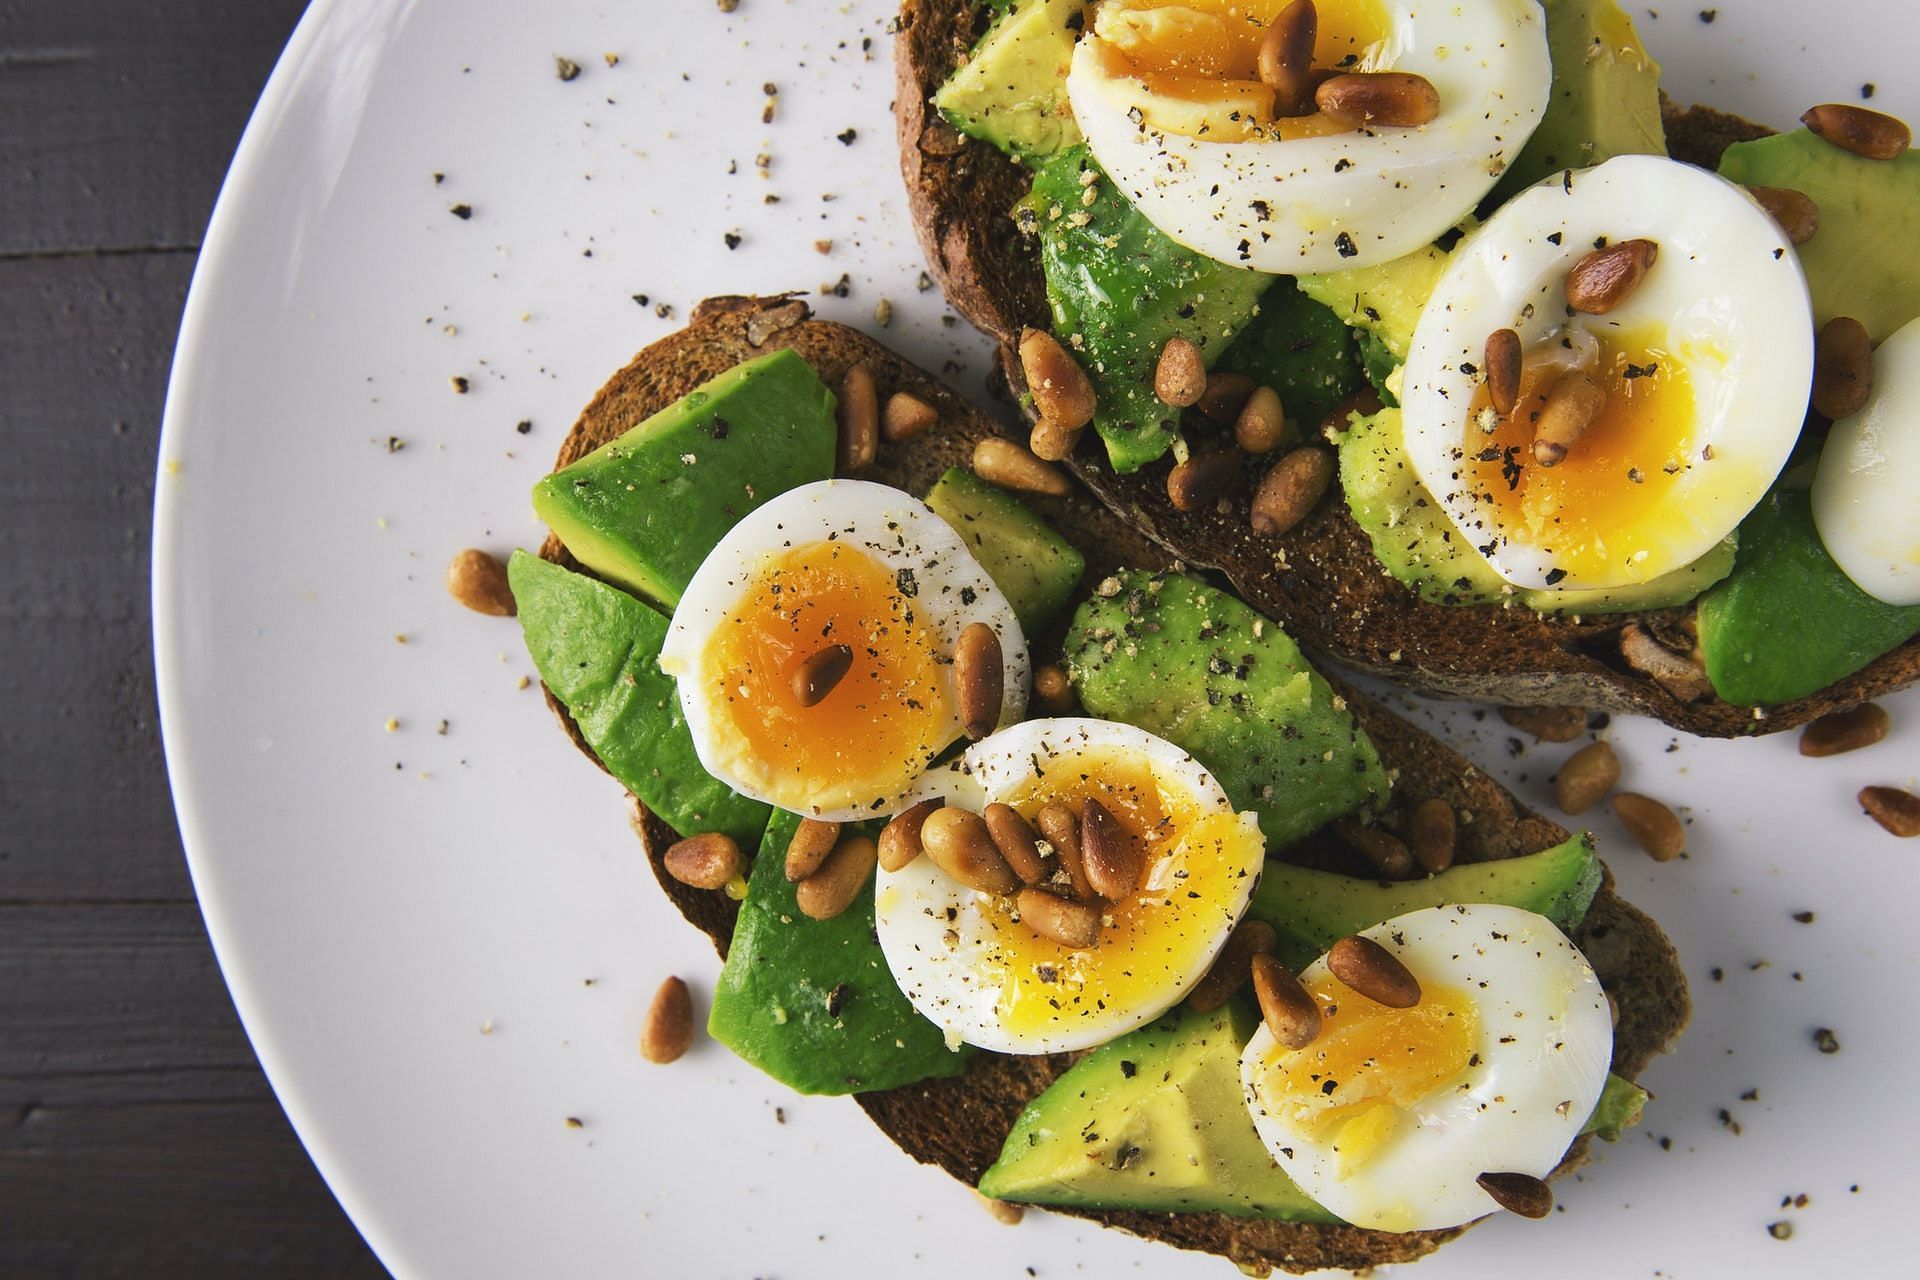 Have a nutritious and healthy breakfast. (Photo by Foodie Factor via pexels)